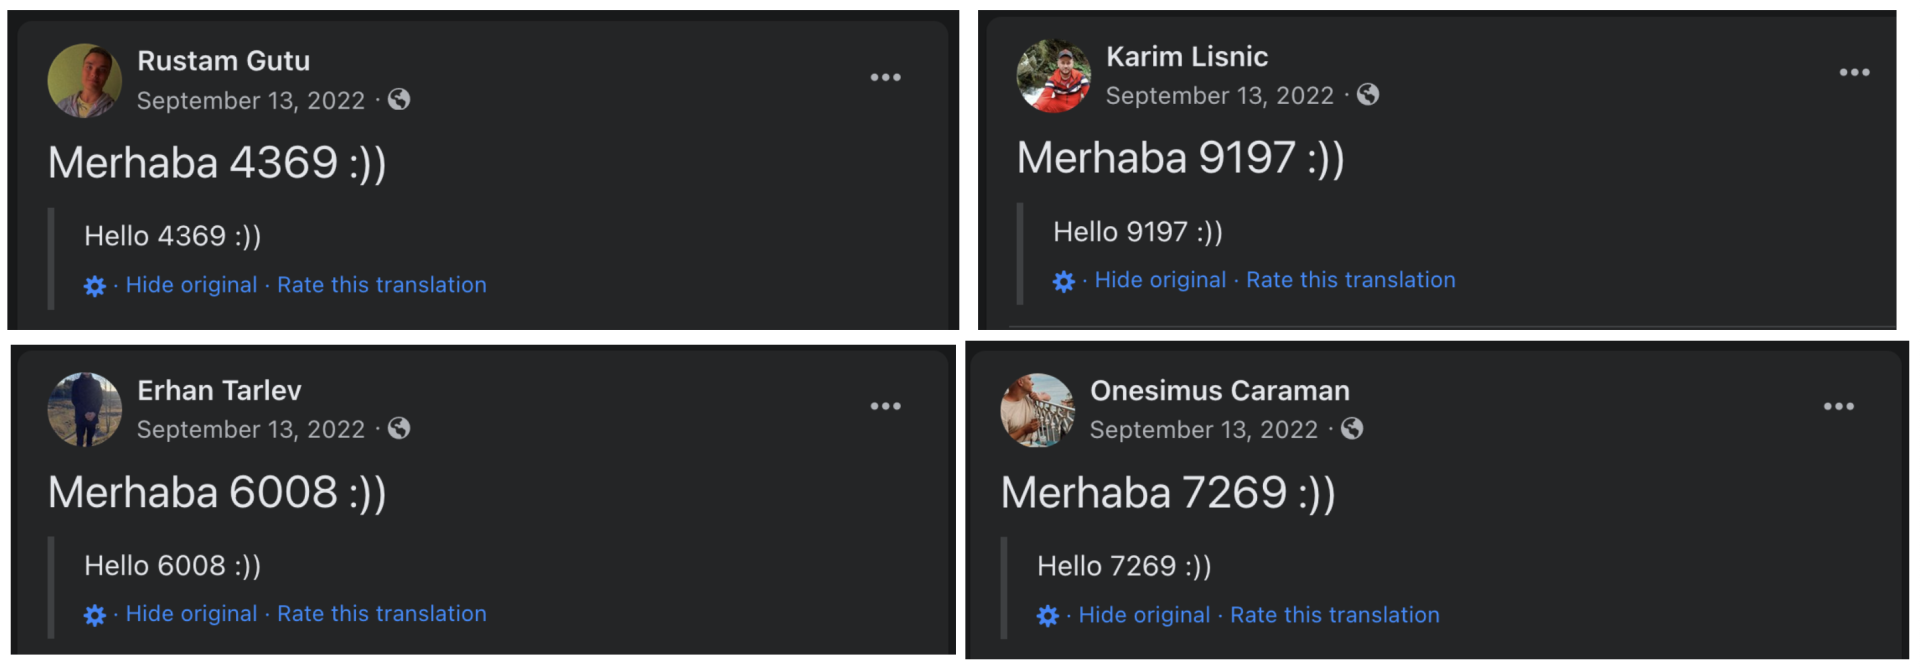 Screenshots of highly similar posts across four of the accounts in the network, all of which say the word “Merhaba,” a four-digit number, and an emoticon smiley face. All of the accounts also had previous profile photos seemingly of a person of the opposite gender. 